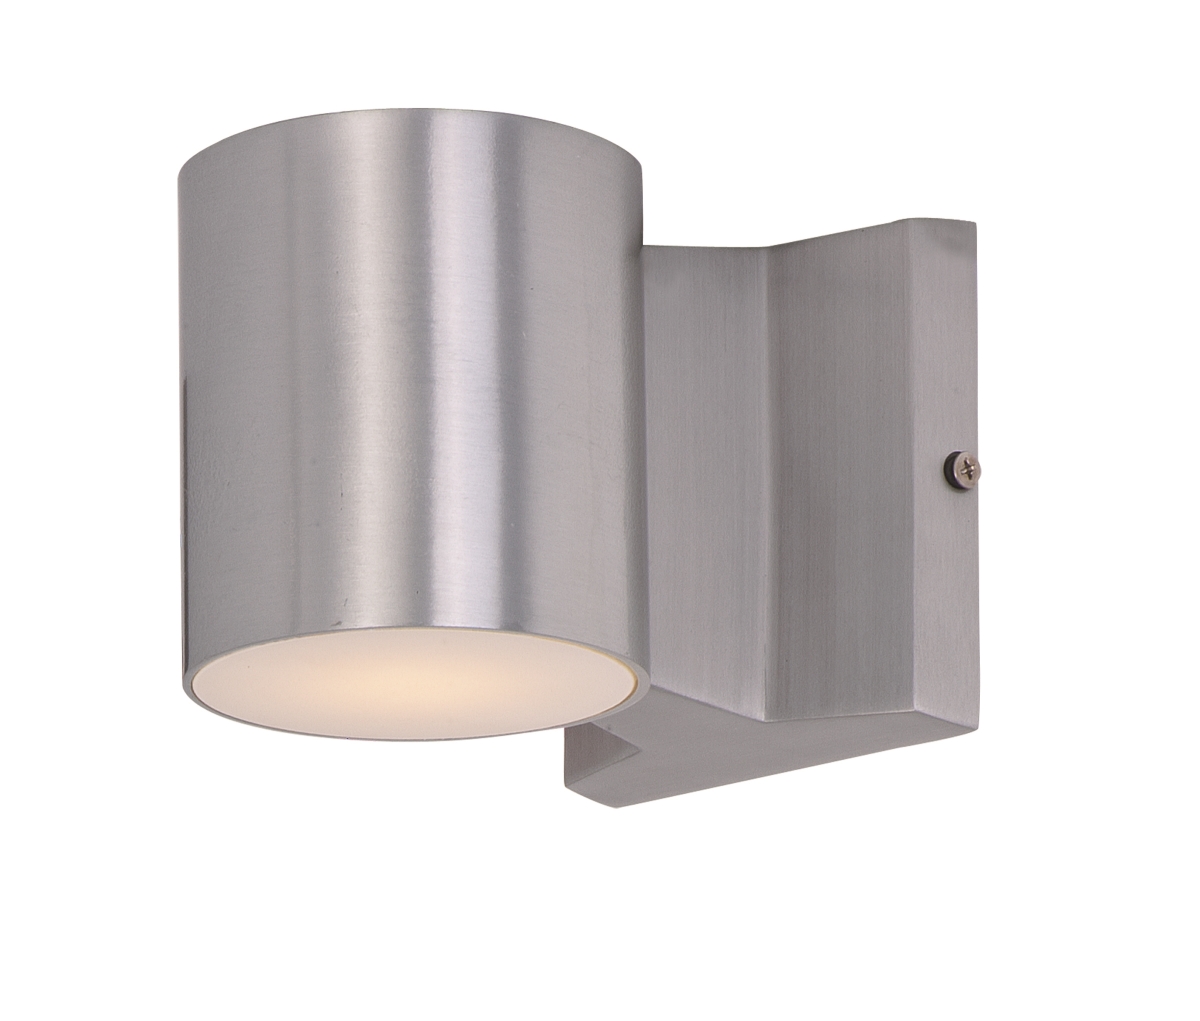 4 X 4 In. Lightray Led 2-light Wall Sconce, Brushed Aluminum